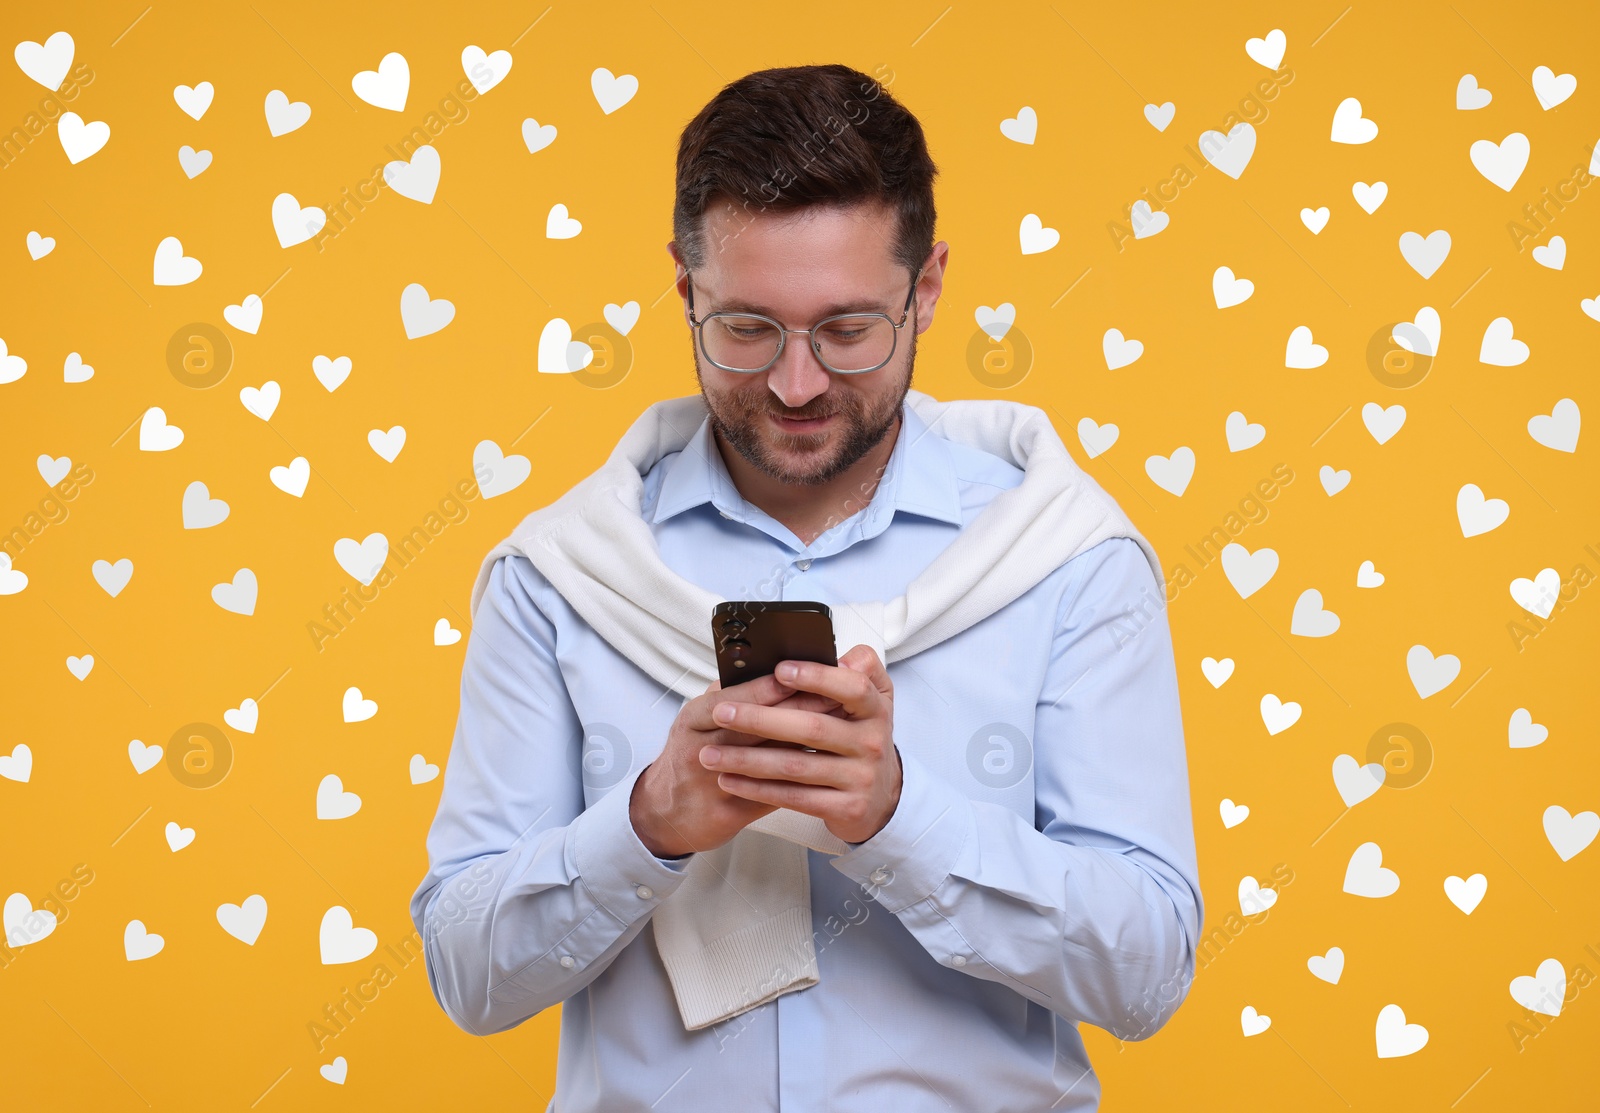 Image of Long distance love. Man chatting with sweetheart via smartphone on golden background. Hearts around him